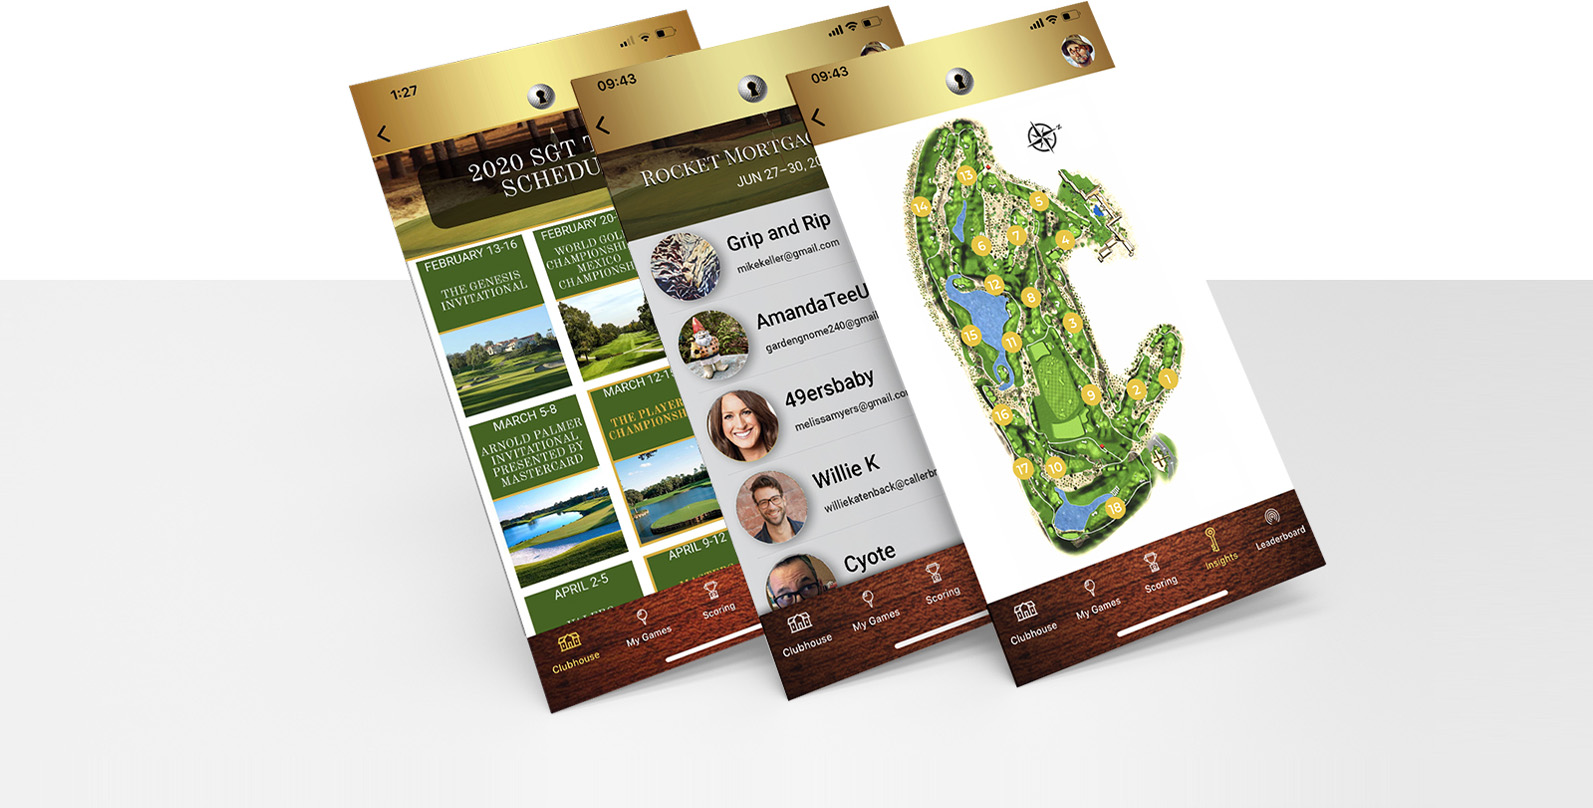 Secret Golf: Stacked screens showing app interface